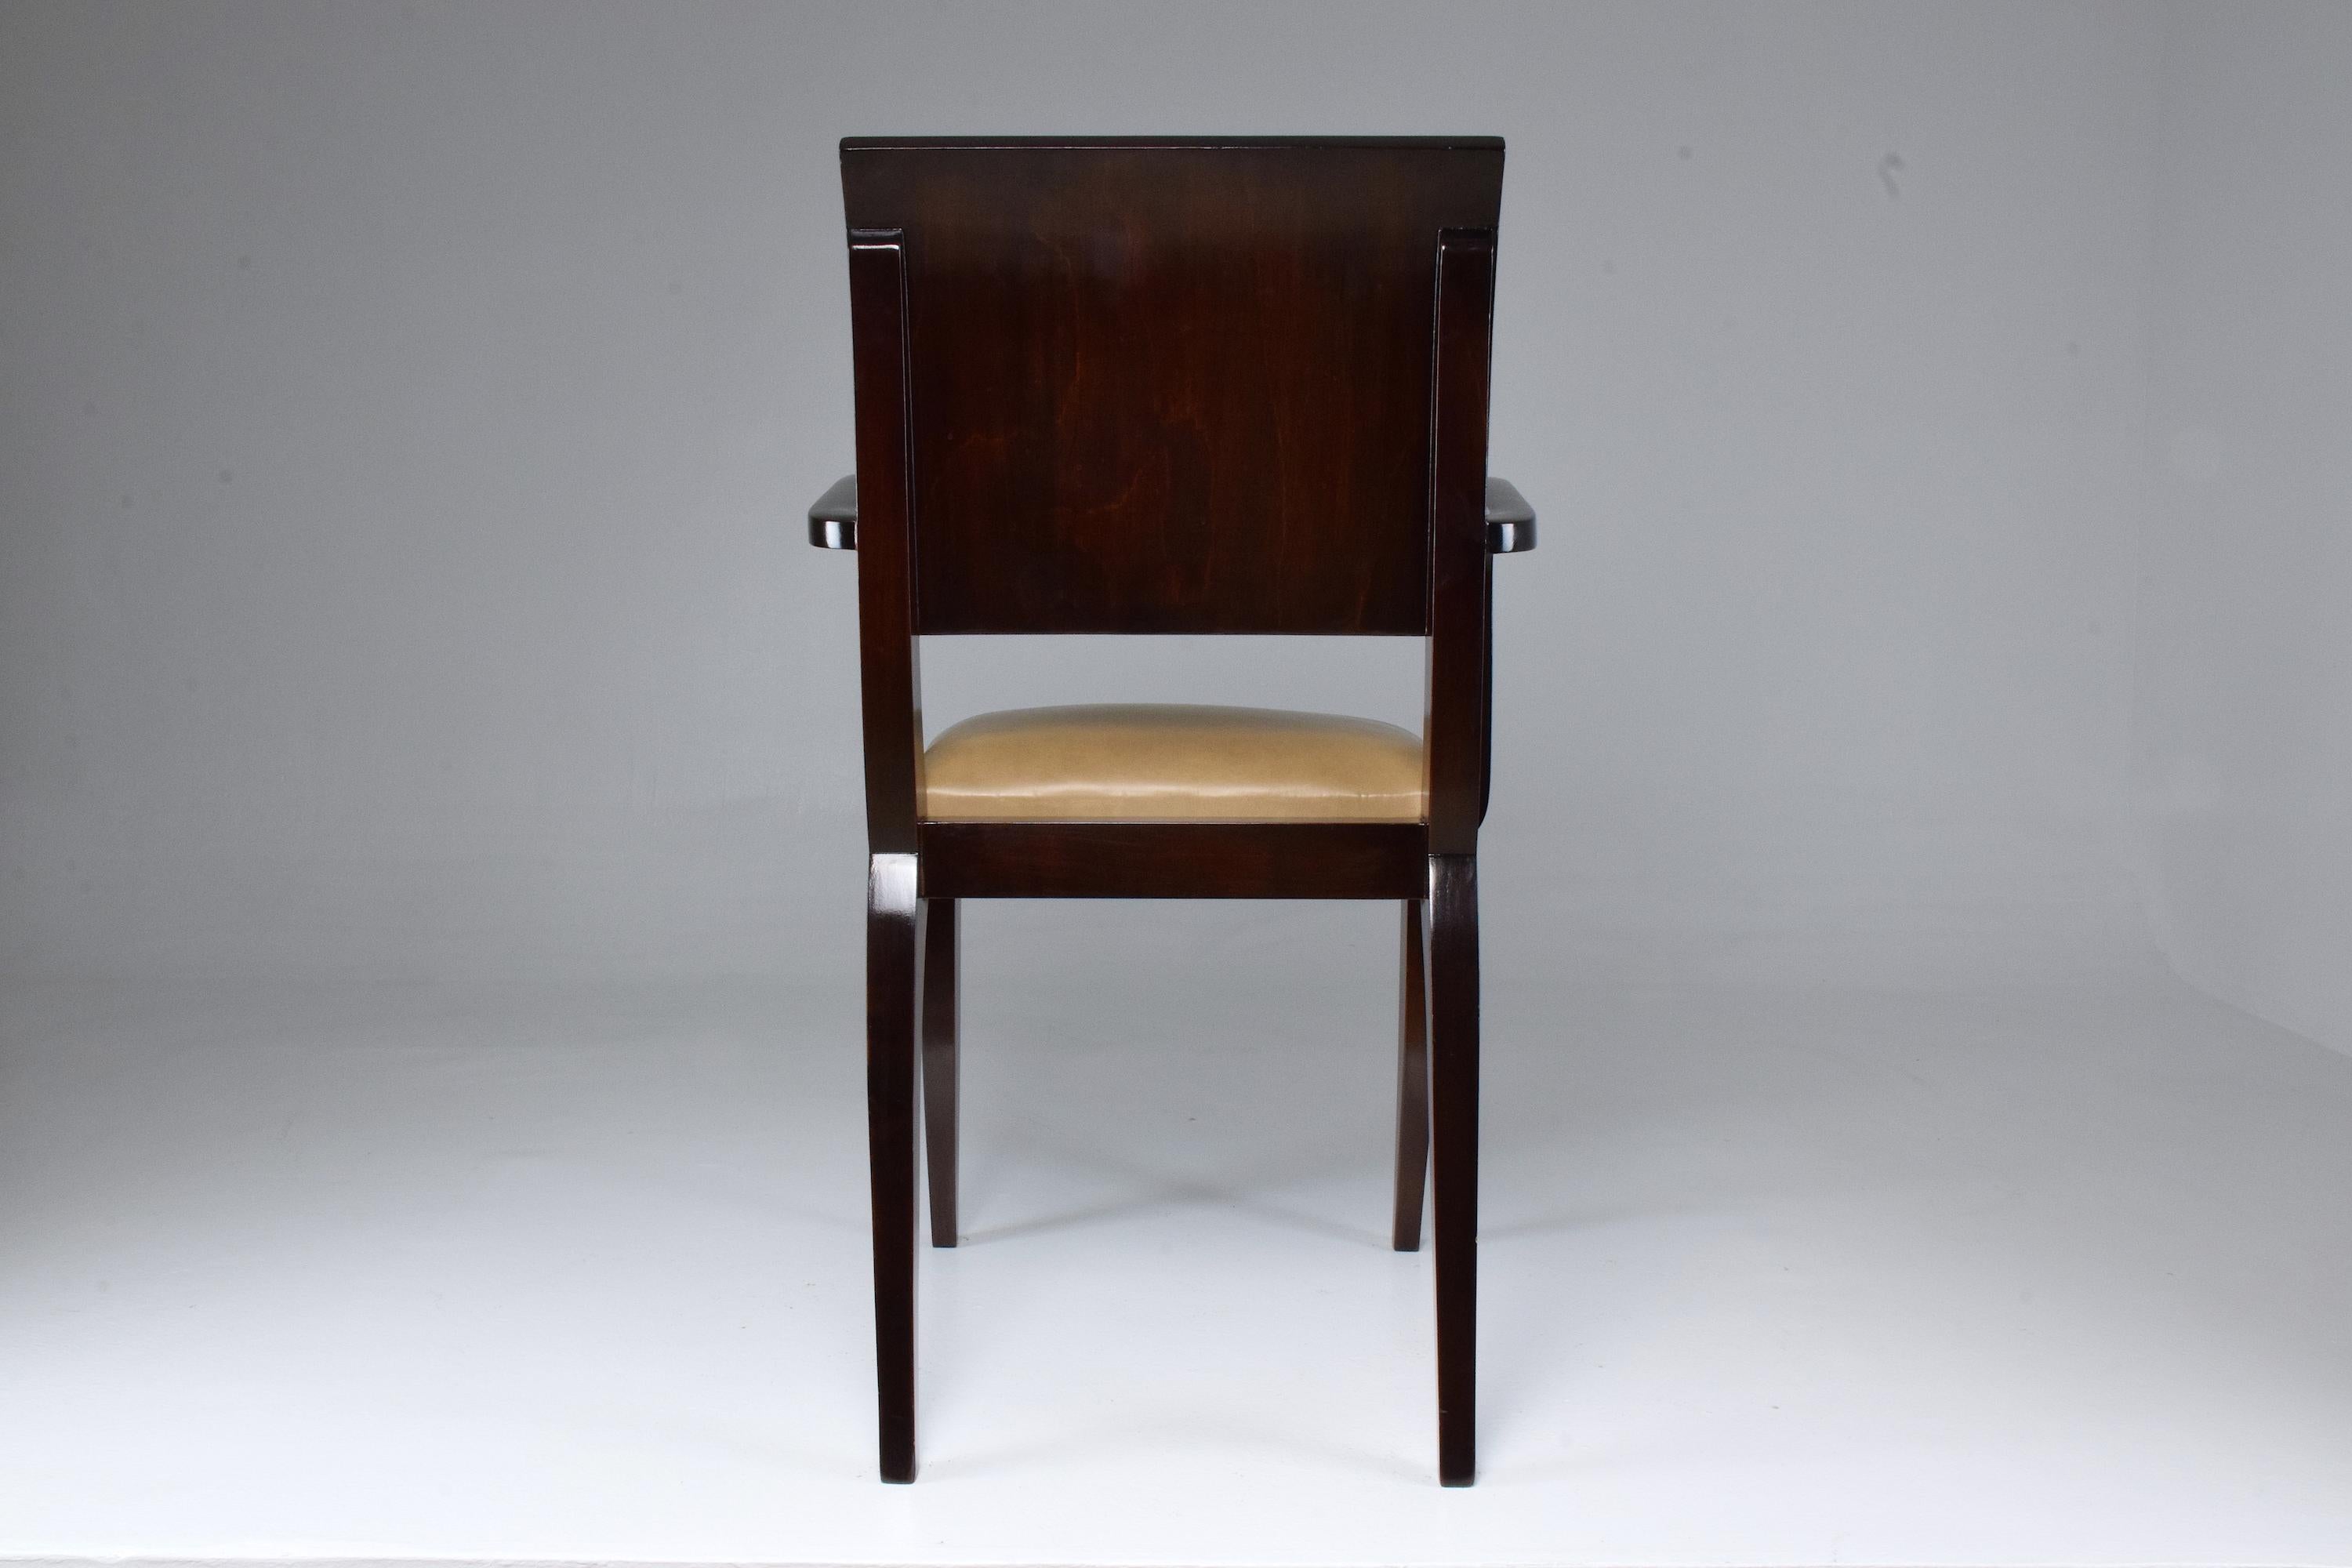 Lacquered French Vintage Art Deco Mahogany Chair, 1940s